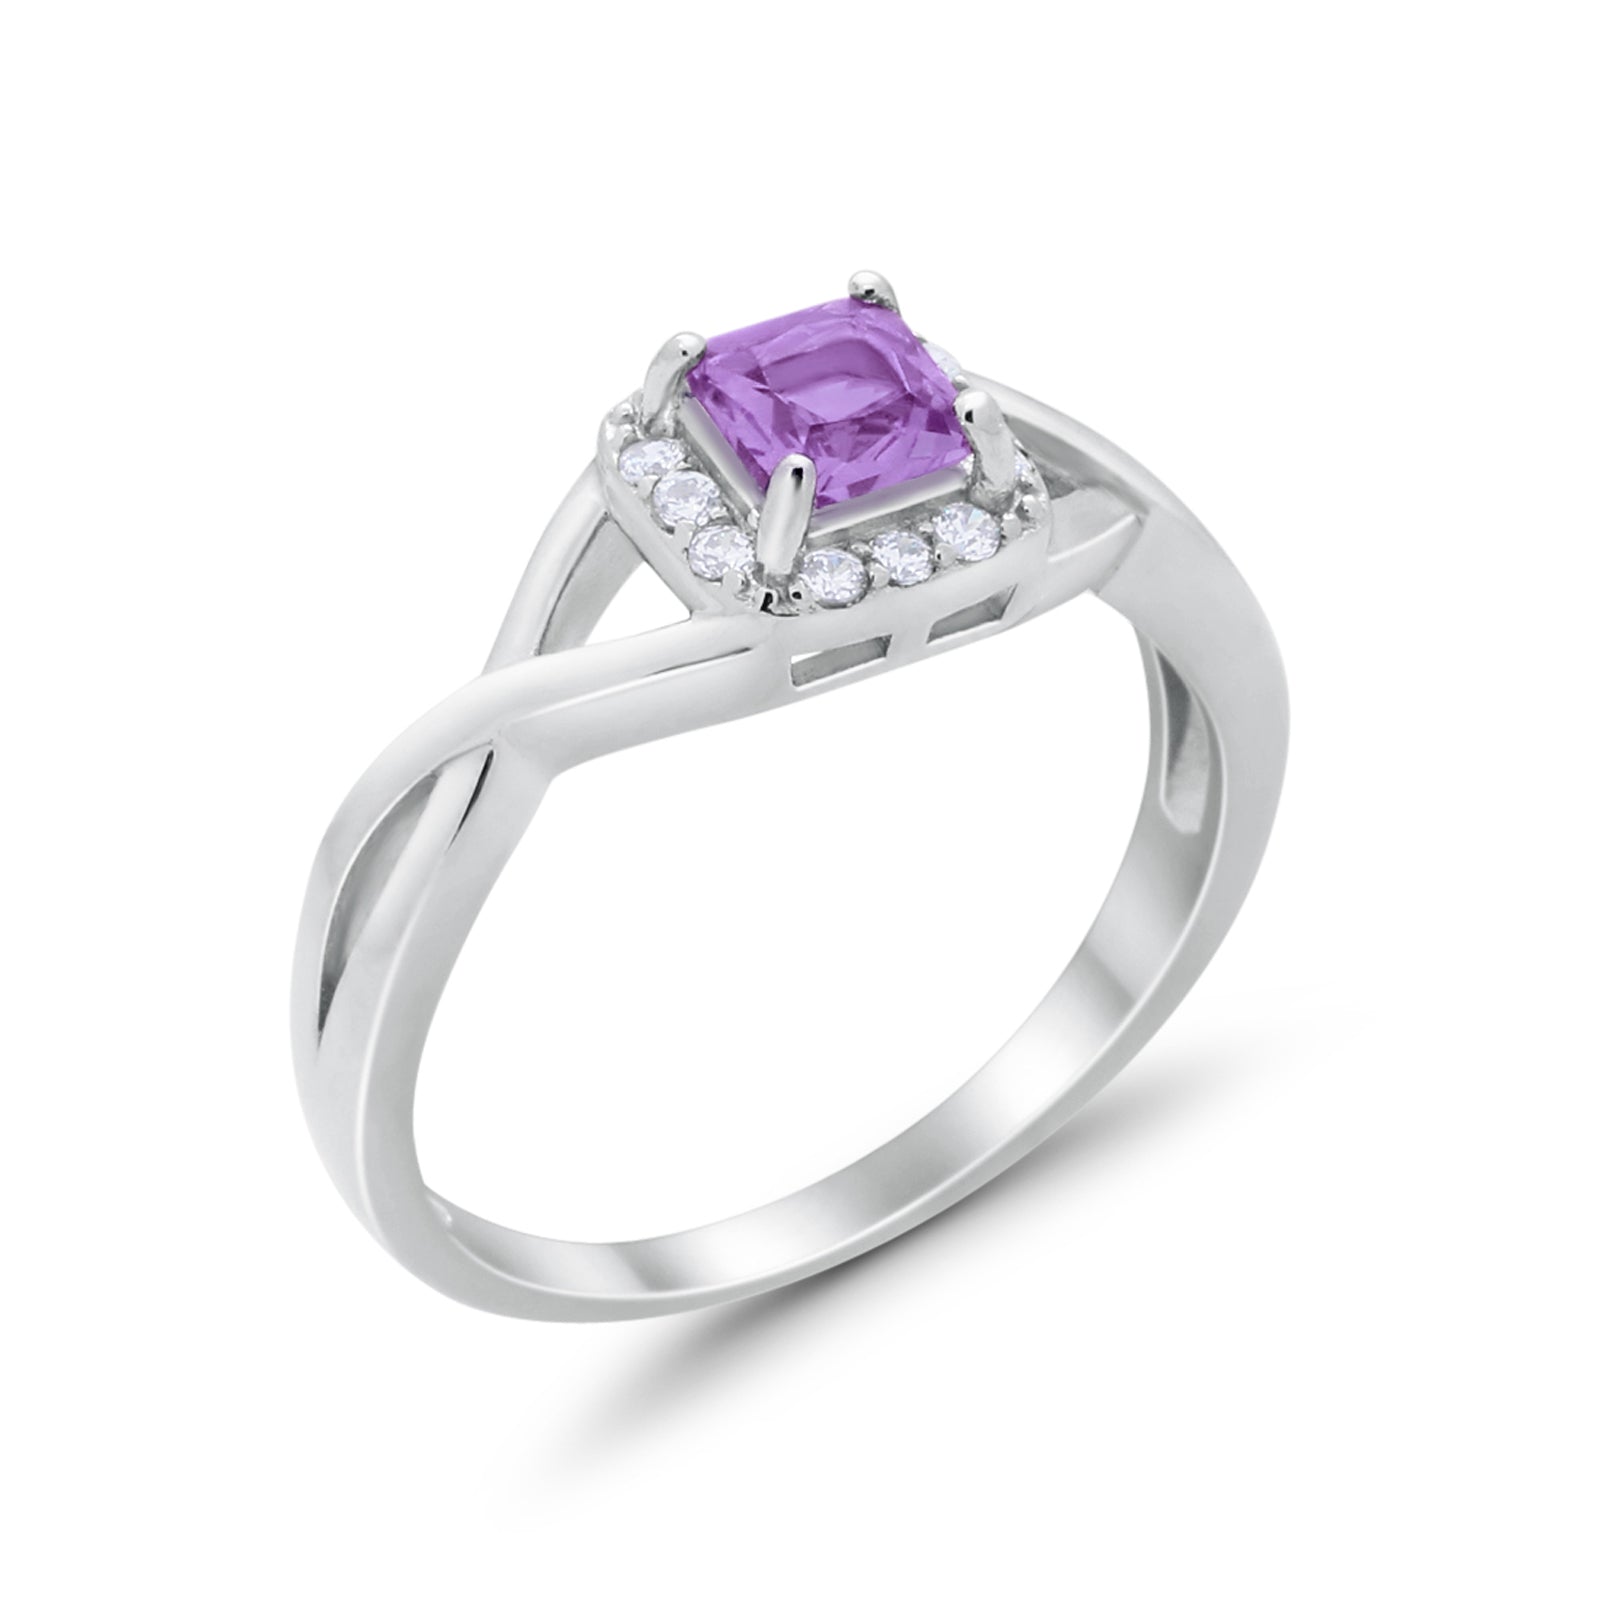 Solitaire Infinity Shank Ring Princess Cut Simulated Lavender CZ 925 Sterling Silver